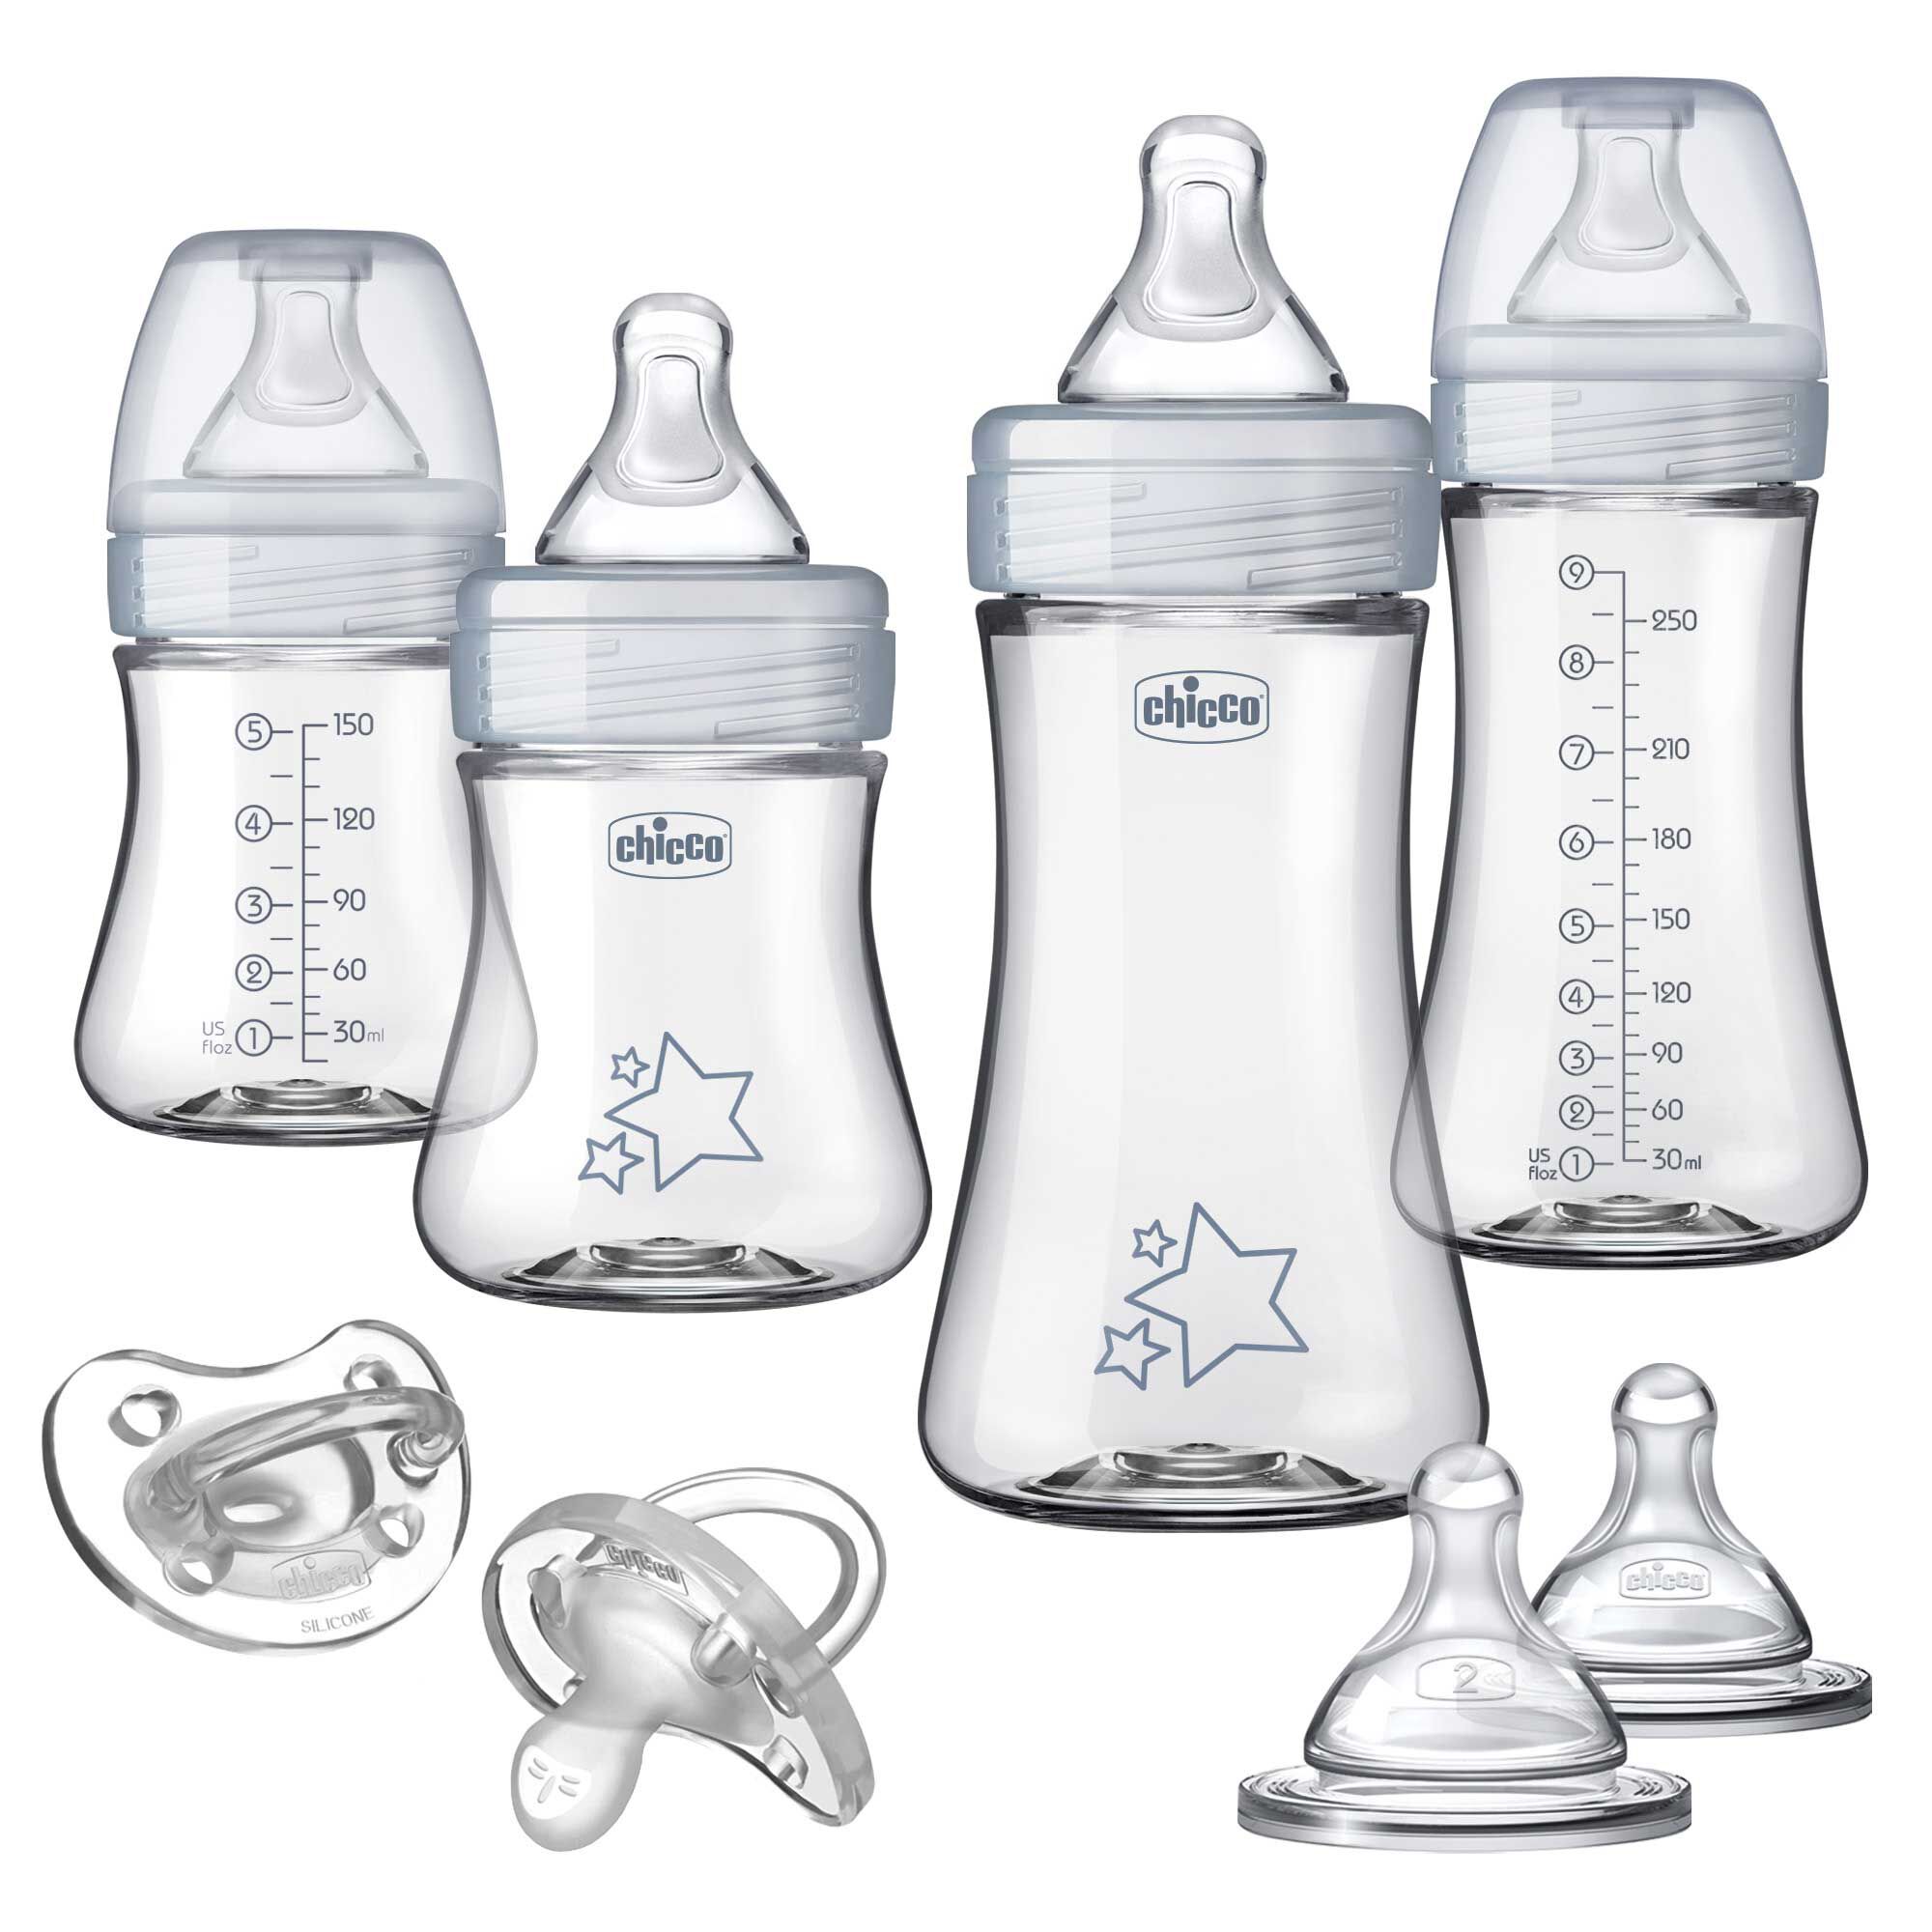 Baby Feeding Supplies Every Parents Should Have - Macy's